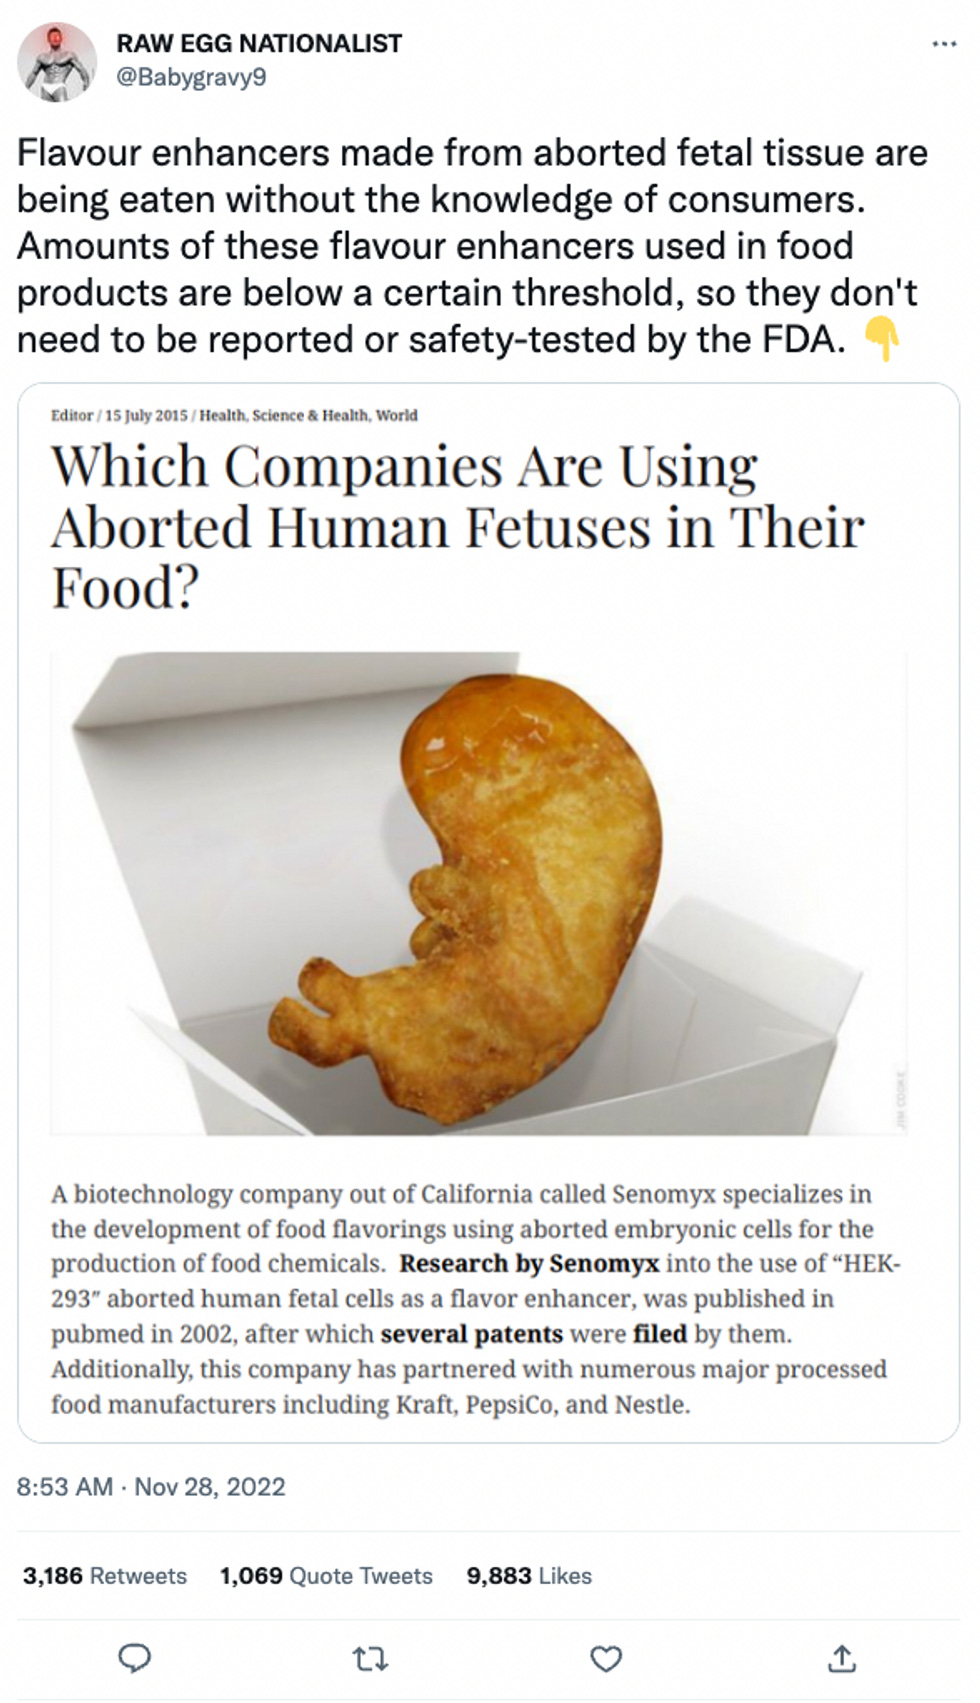 Flavour enhancers made from aborted fetal tissue are being eaten without the knowledge of consumers. Amounts of these flavour enhancers used in food products are below a certain threshold, so they don't need to be reported or safety-tested by the FDA.